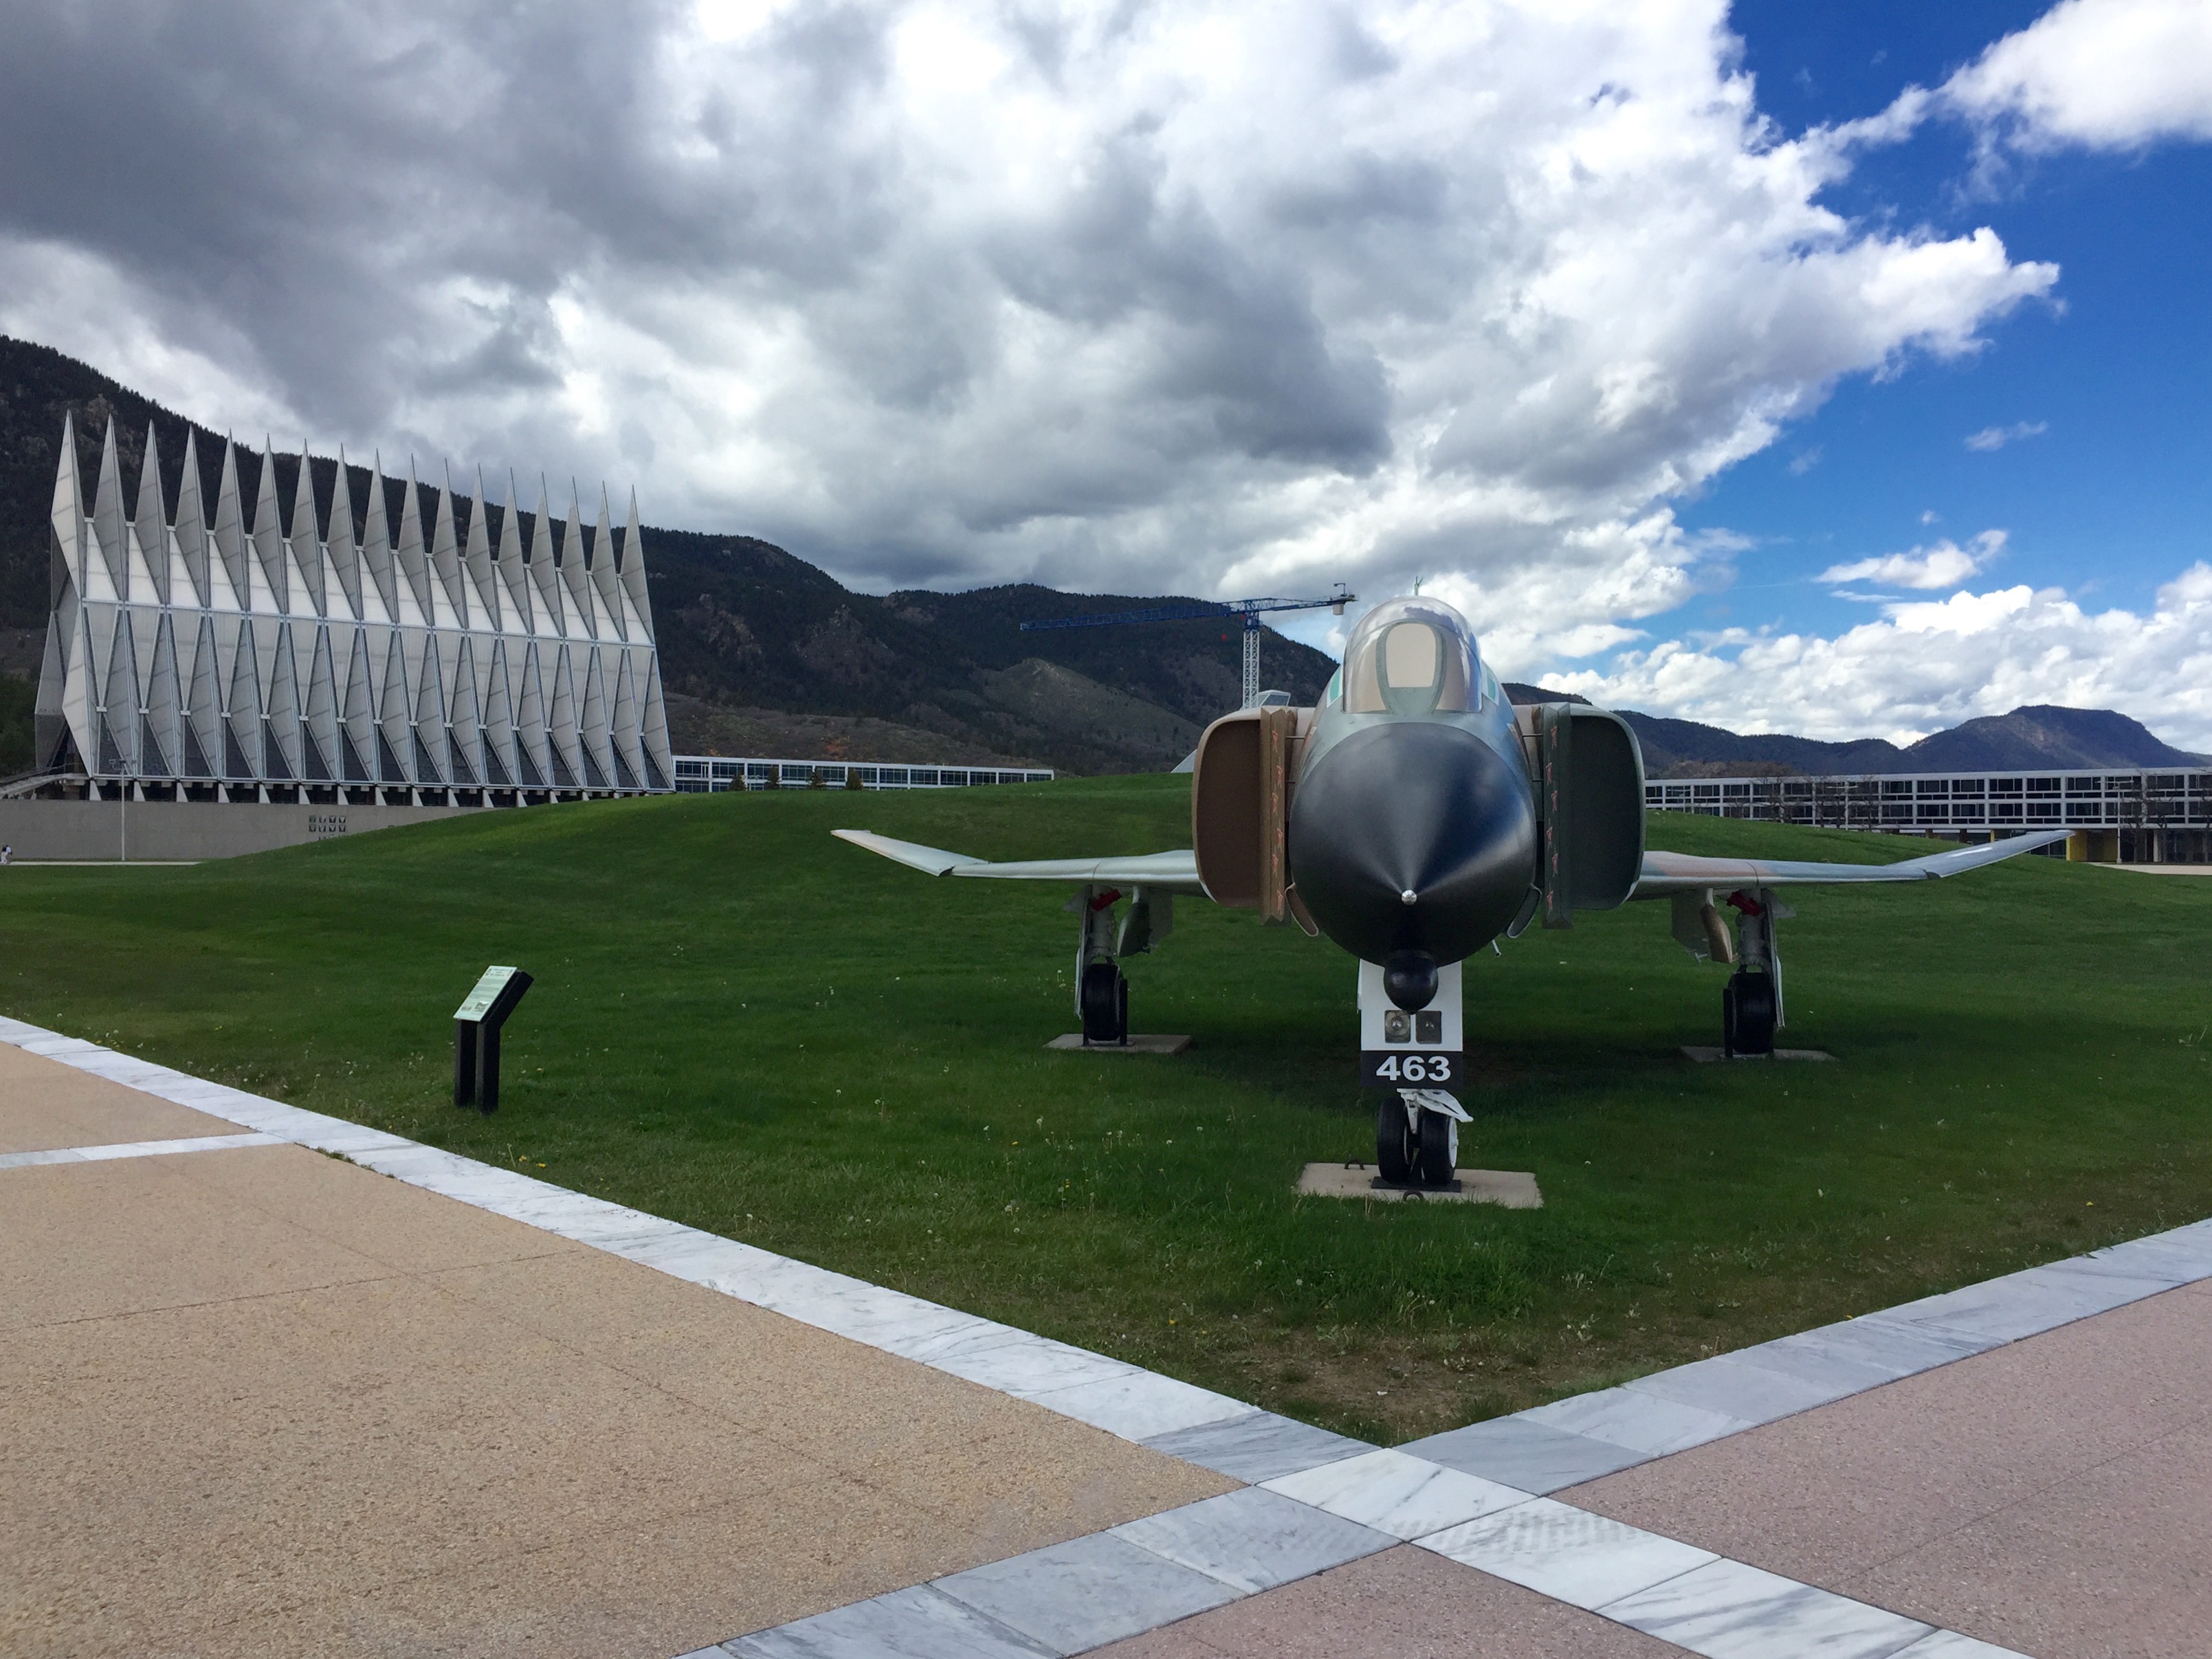 McDonnell F4D Phantom II on display at the Unted States Air Force Academy, Colorado Springs, Colorado. (Unattributed)